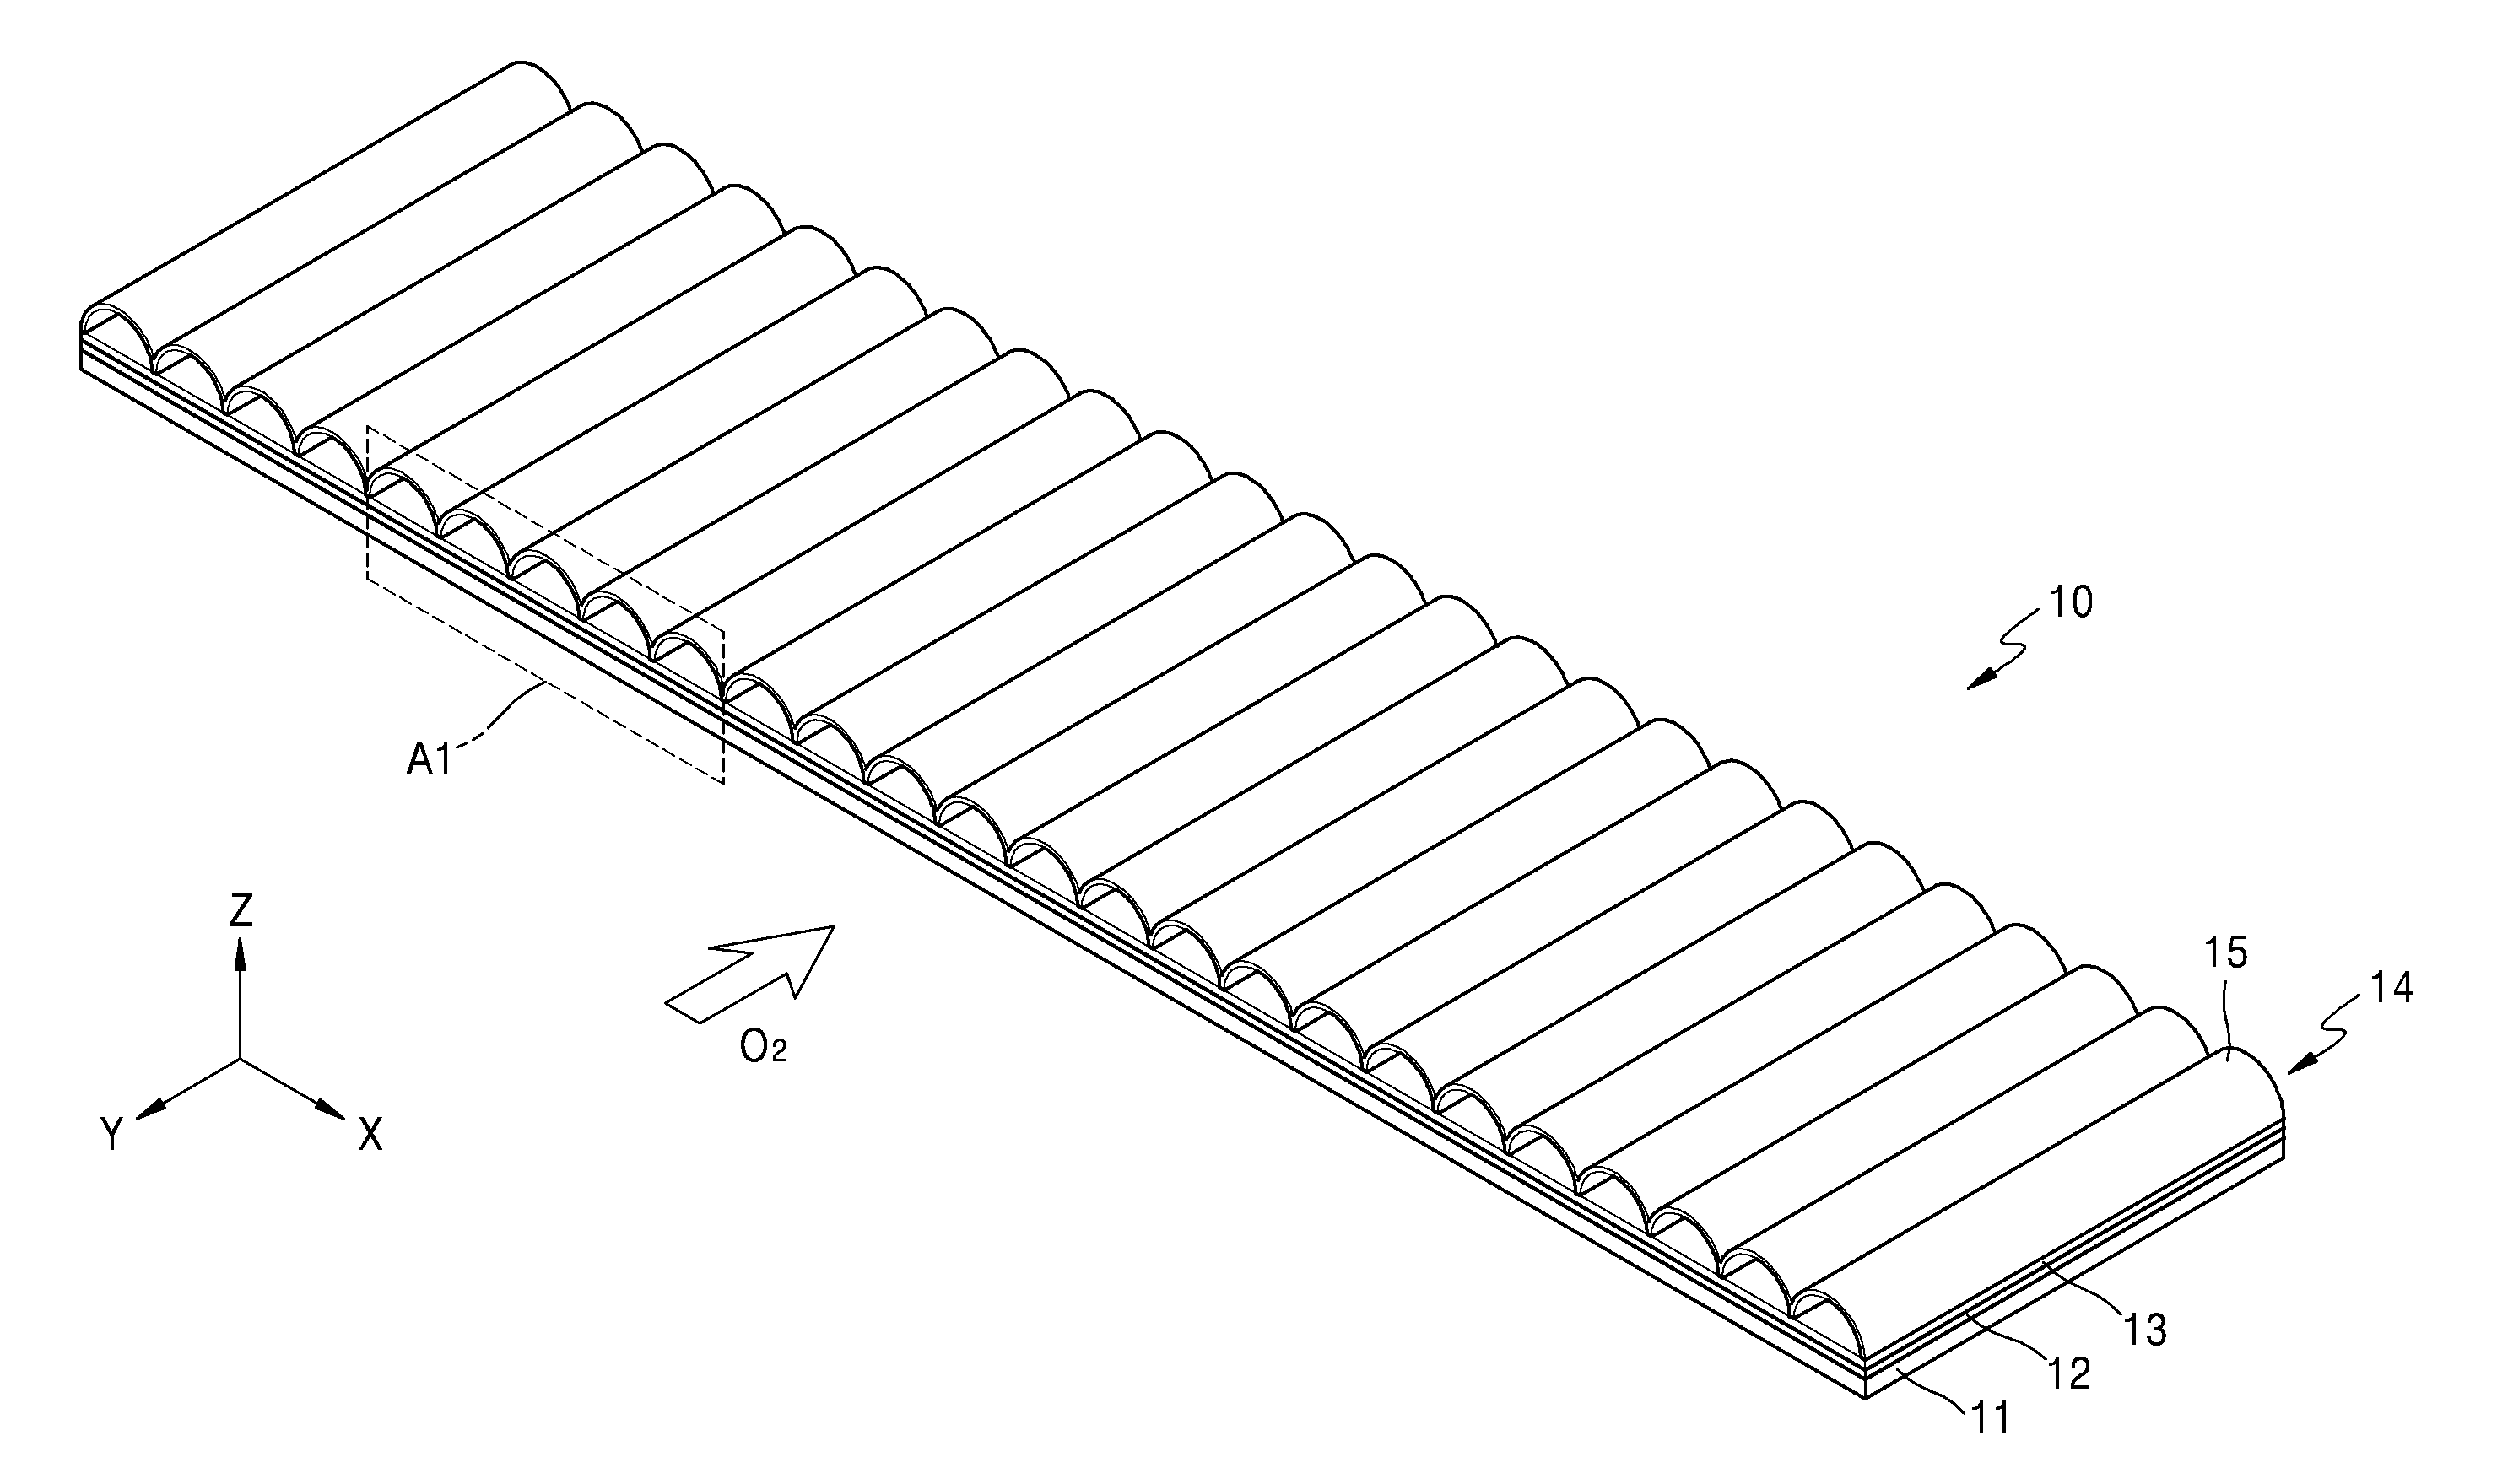 Metal-air battery cell, metal-air battery including metal-air battery cell and method of fabricating the same